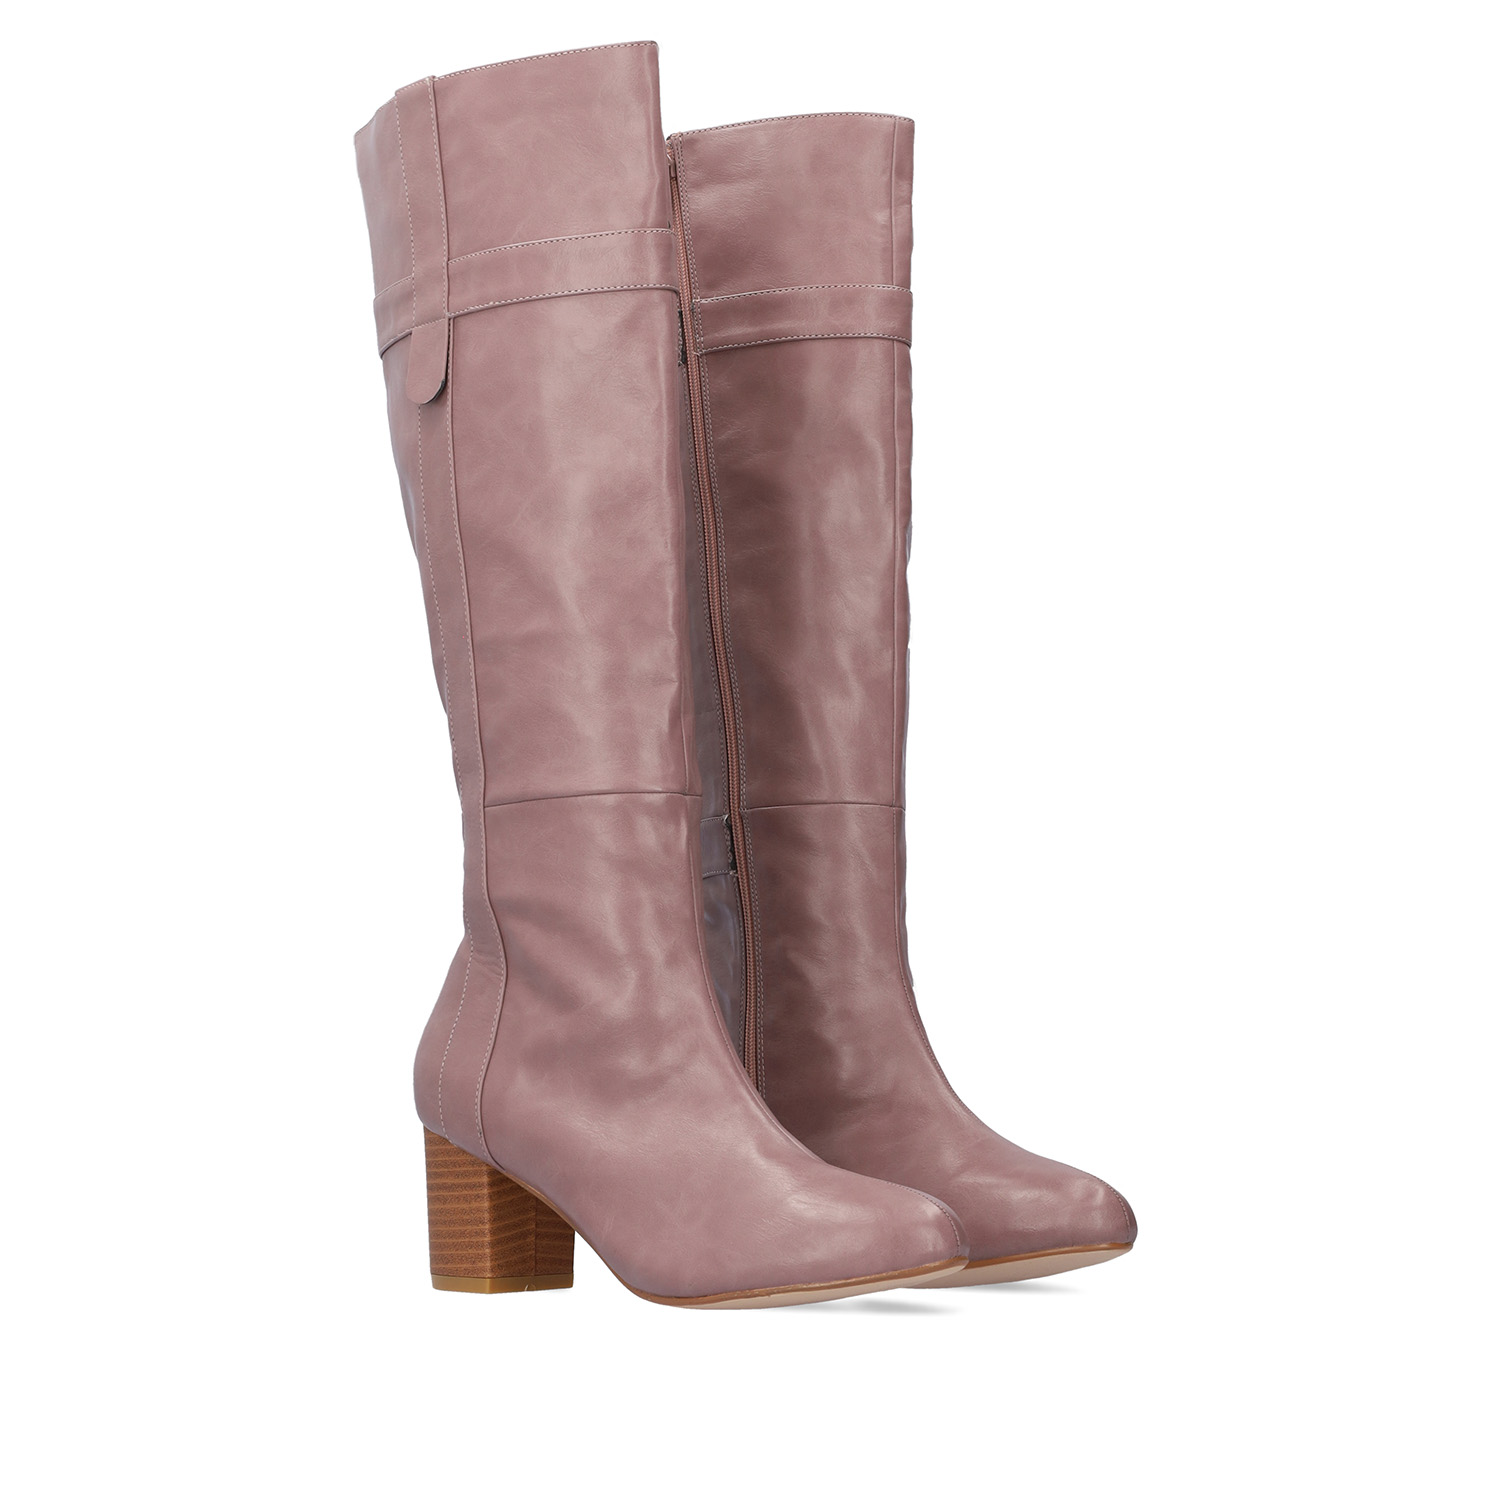 Heeled high-calf boots in mauve faux leather 